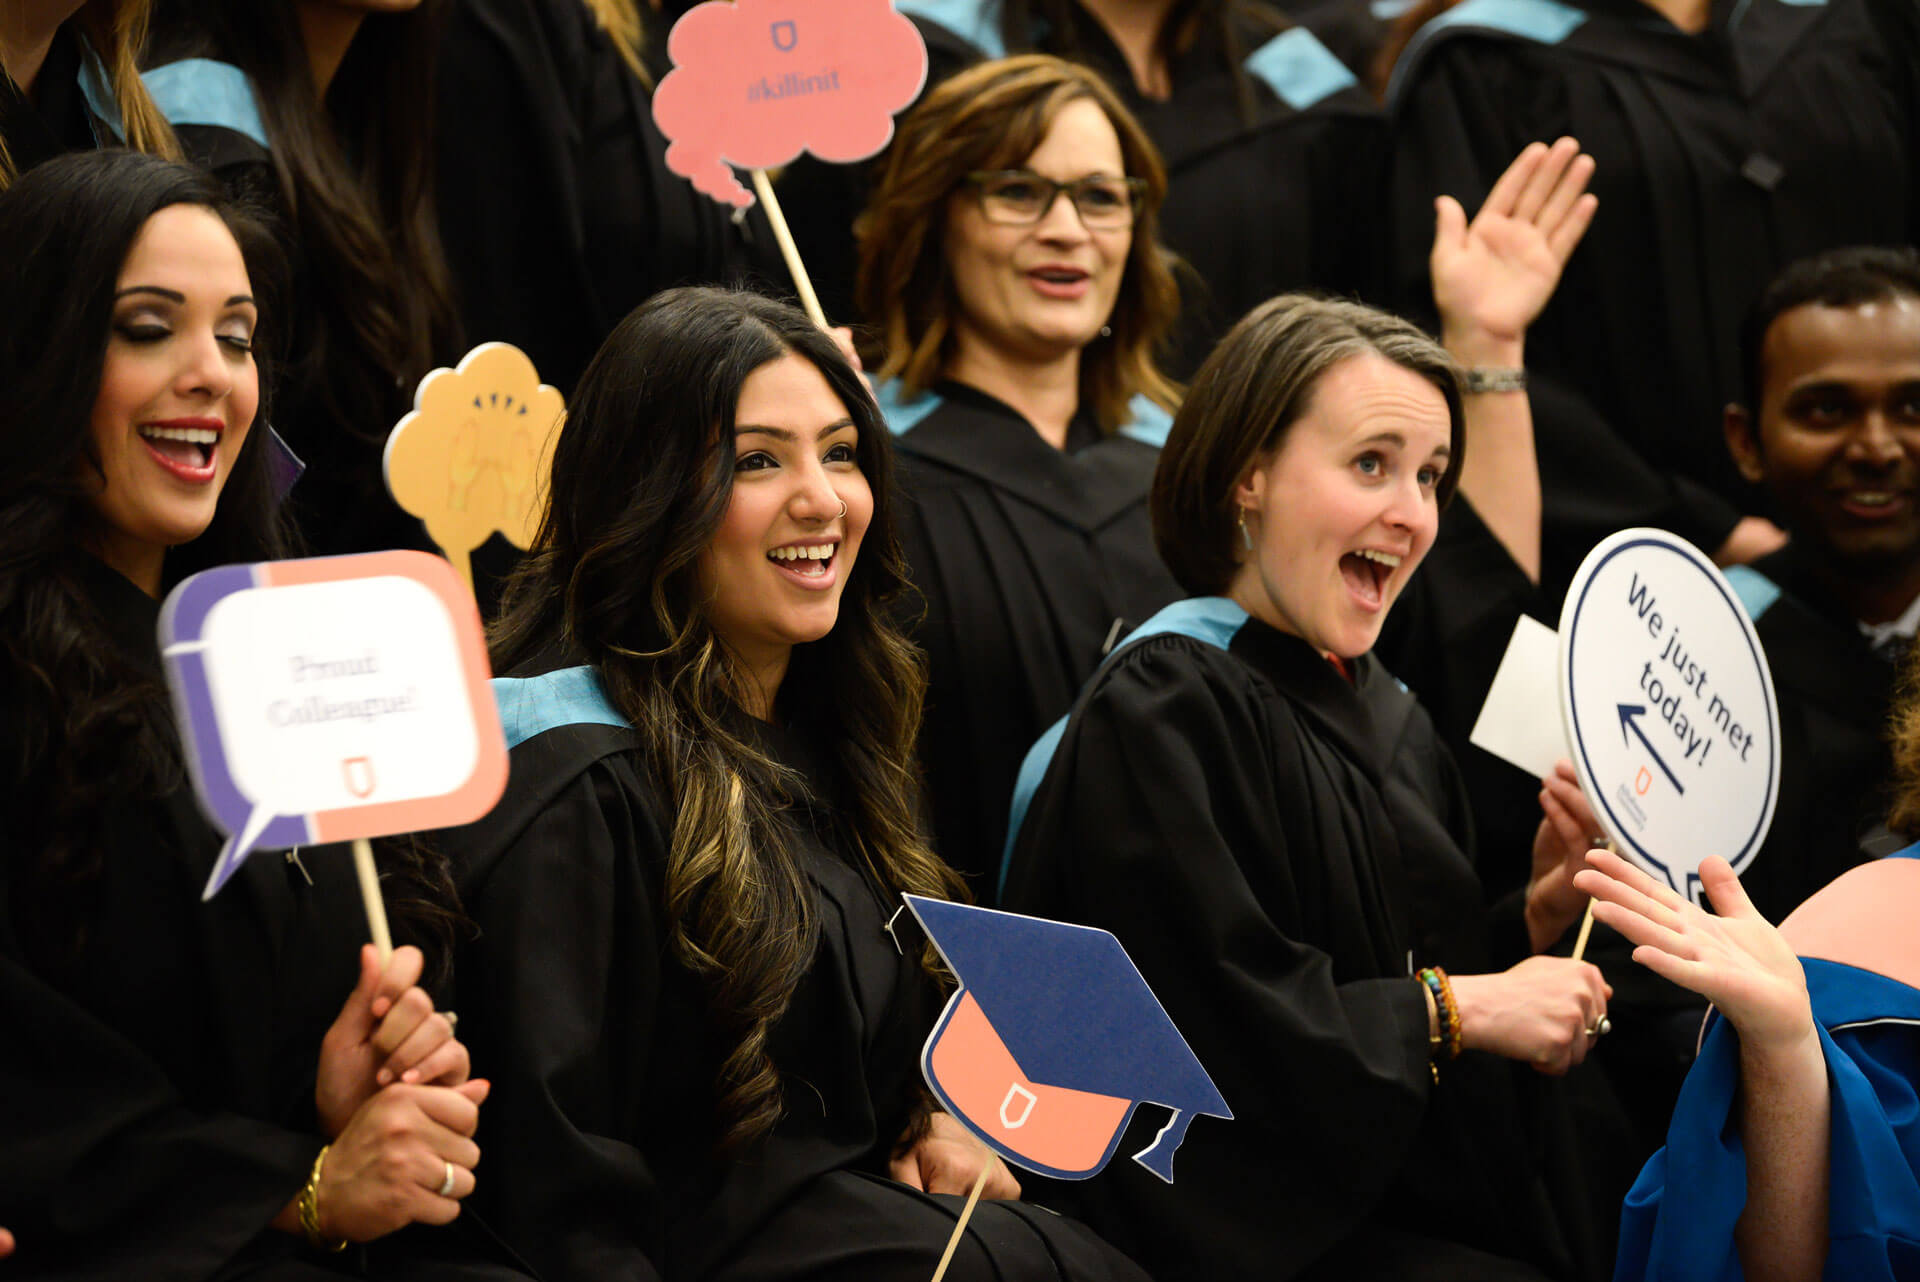 A group of Master of Nursing graduates celebrate their special day during a ceremony in 2018.